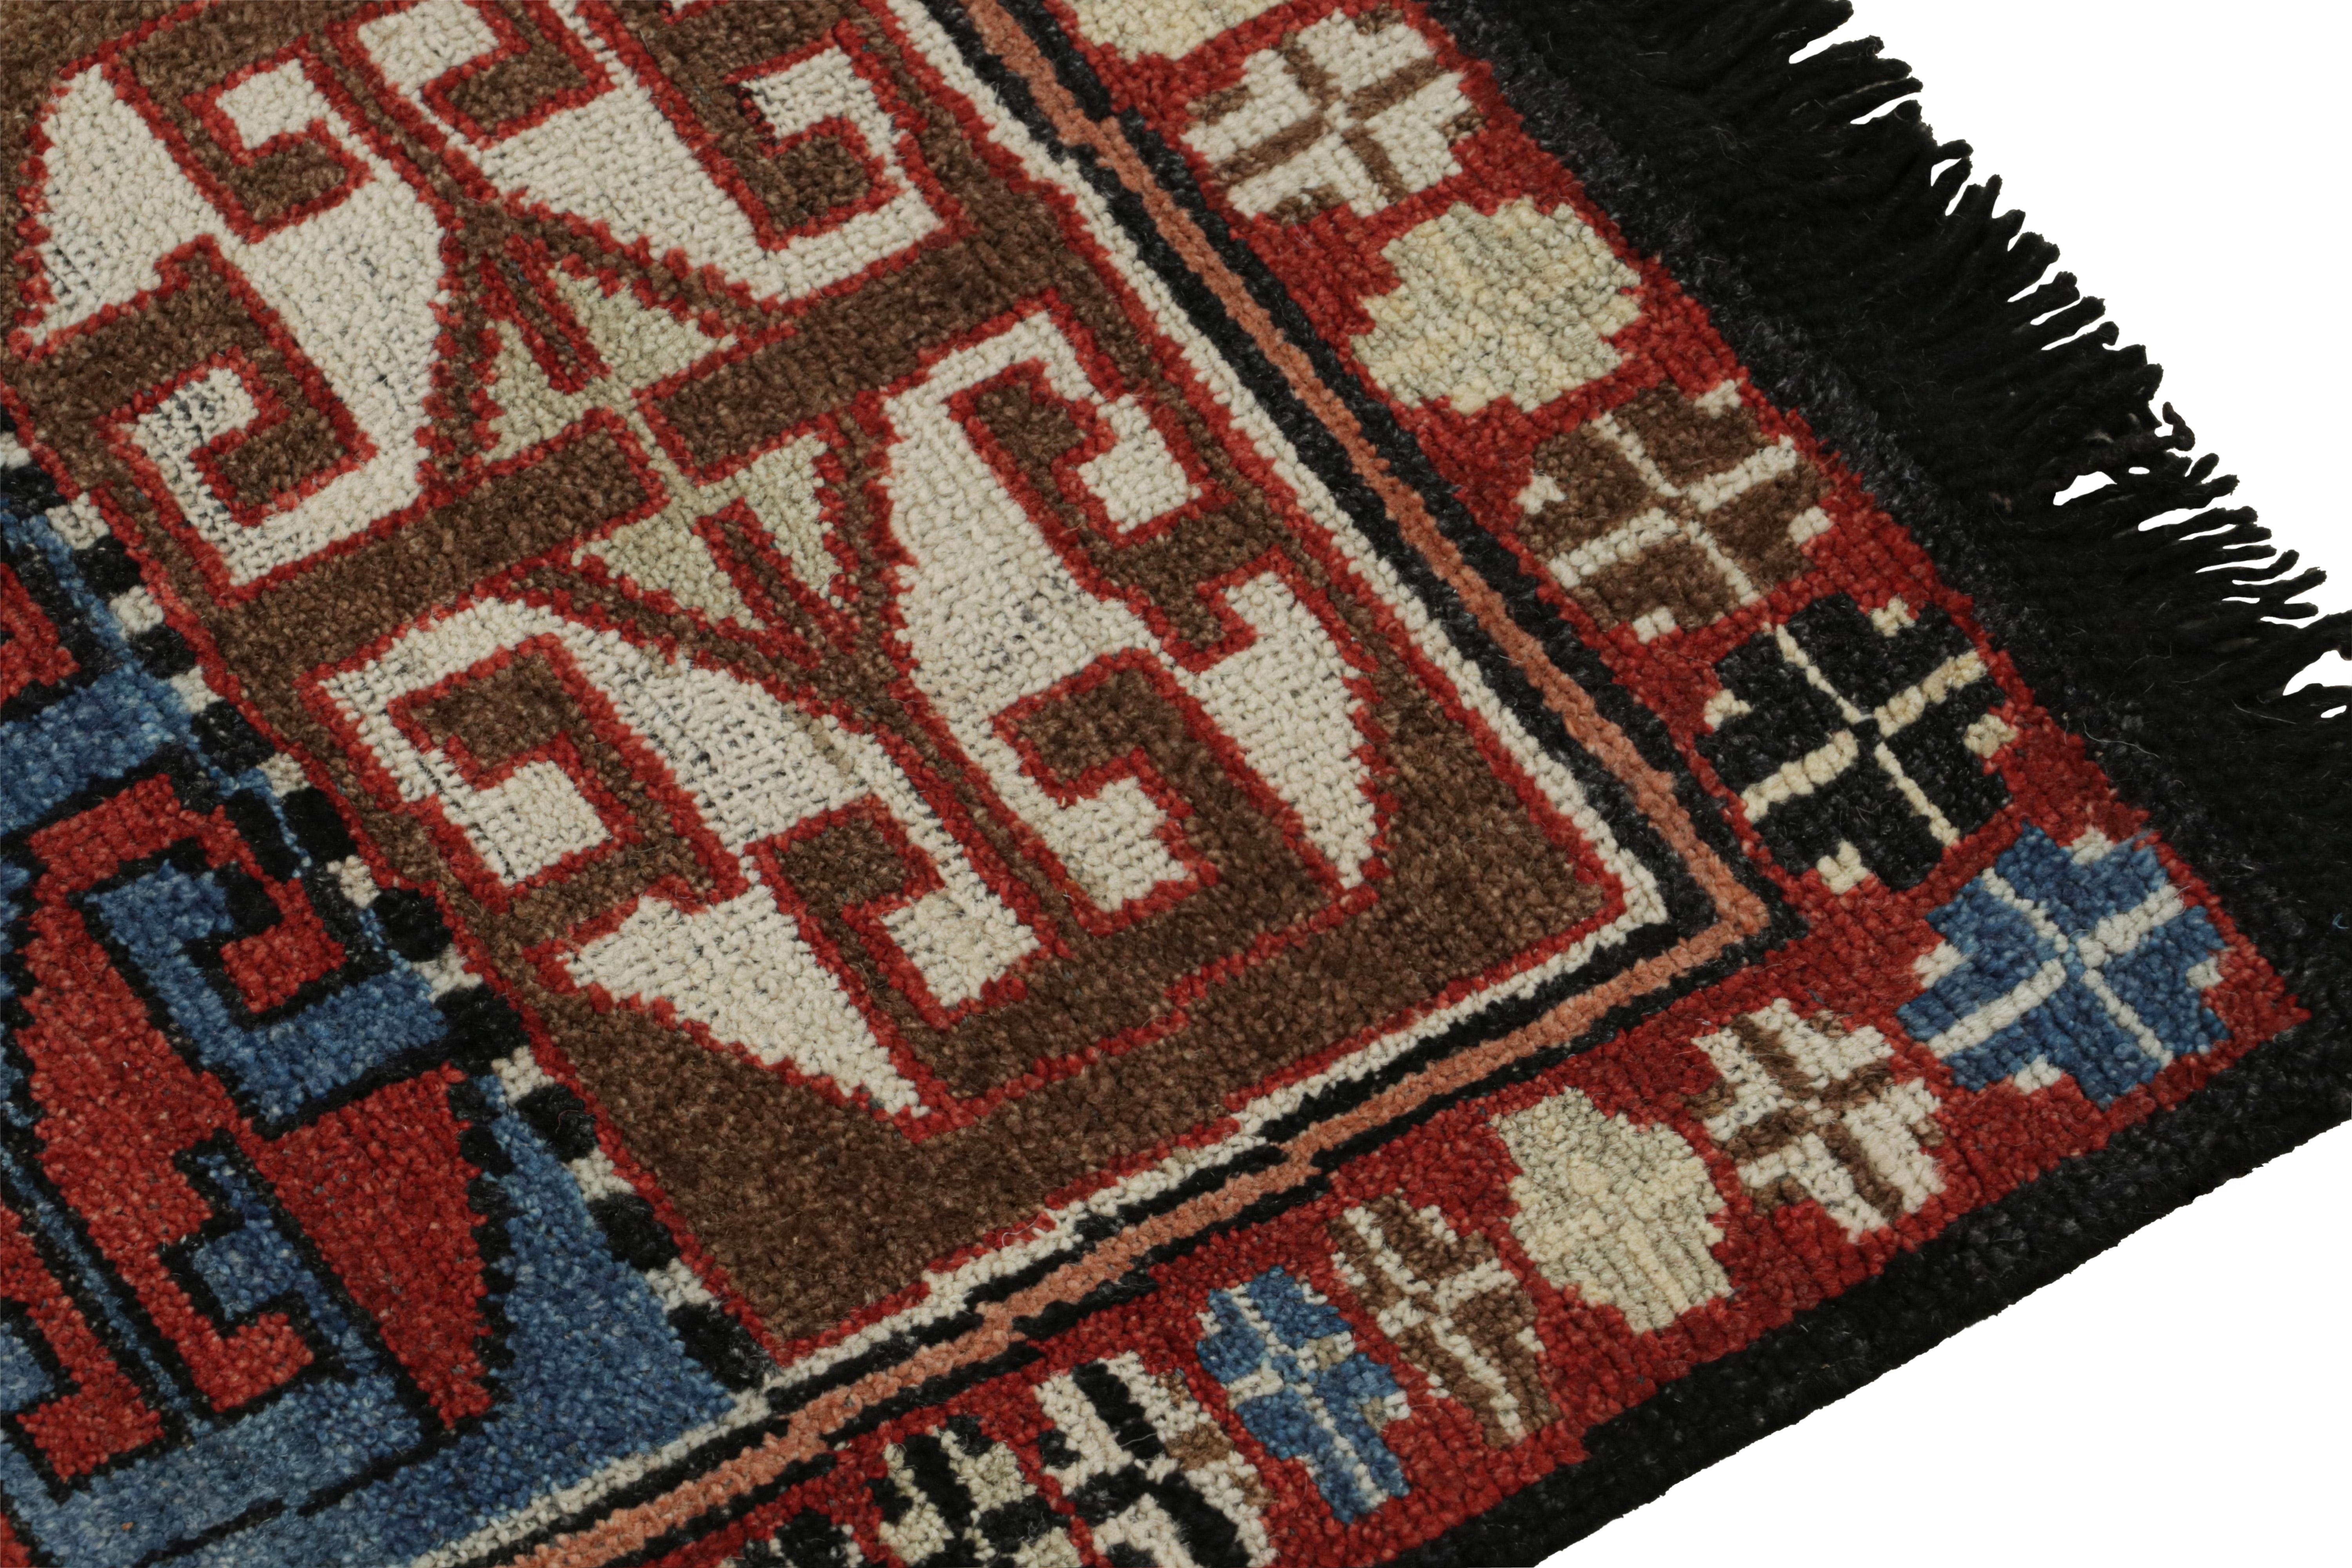 Wool Rug & Kilim’s Antique Tribal Style Rug in Red, Blue & Brown Patterns For Sale